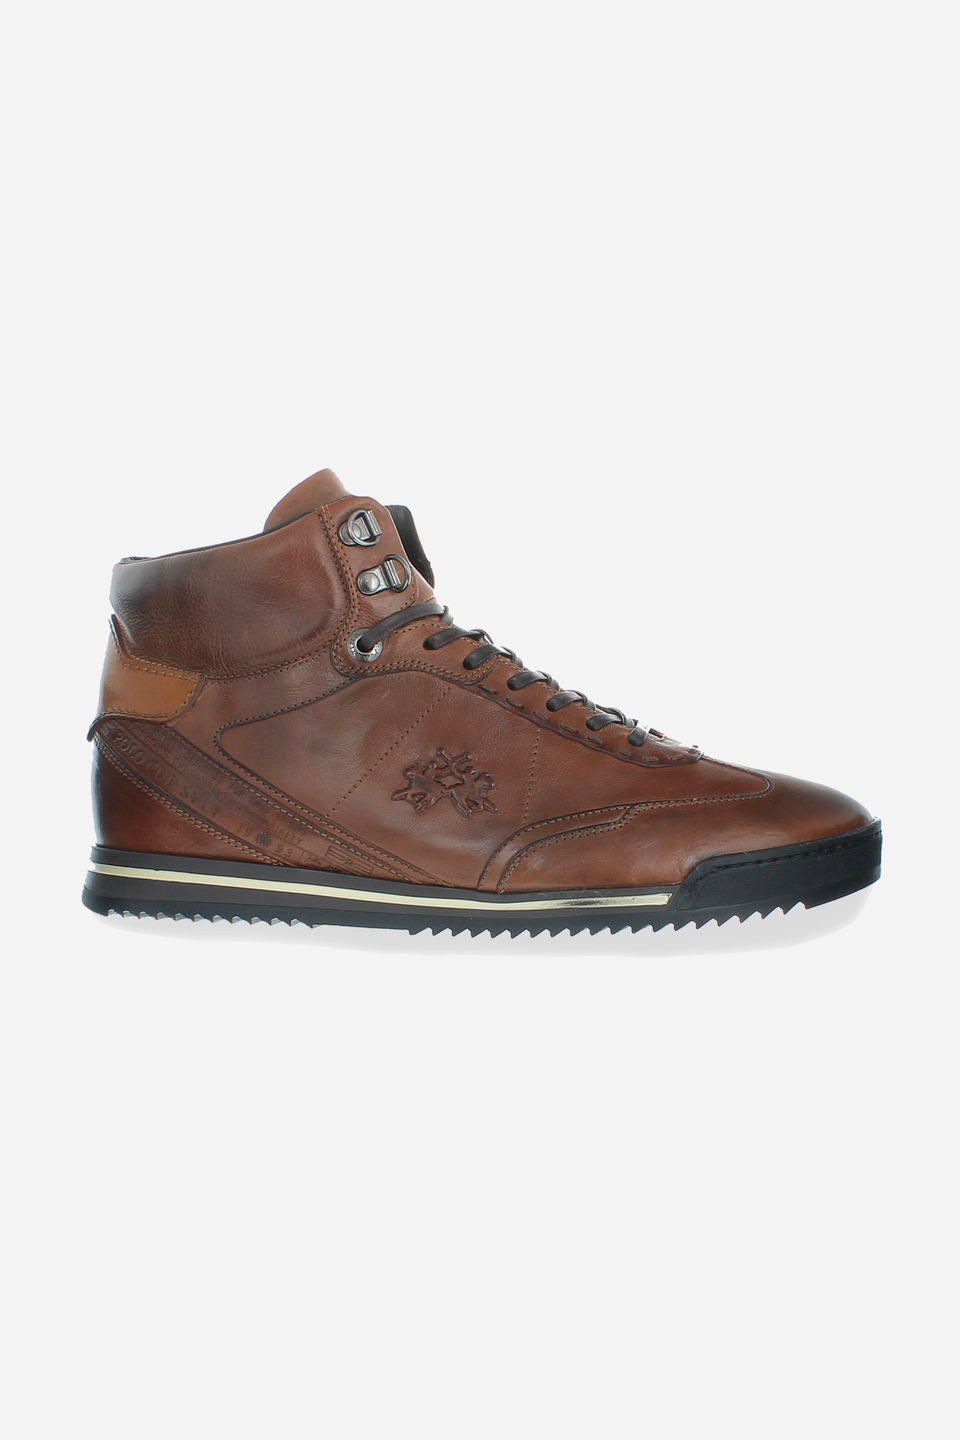 High-top men's trainer in calfskin with contrasting leather inserts | La Martina - Official Online Shop